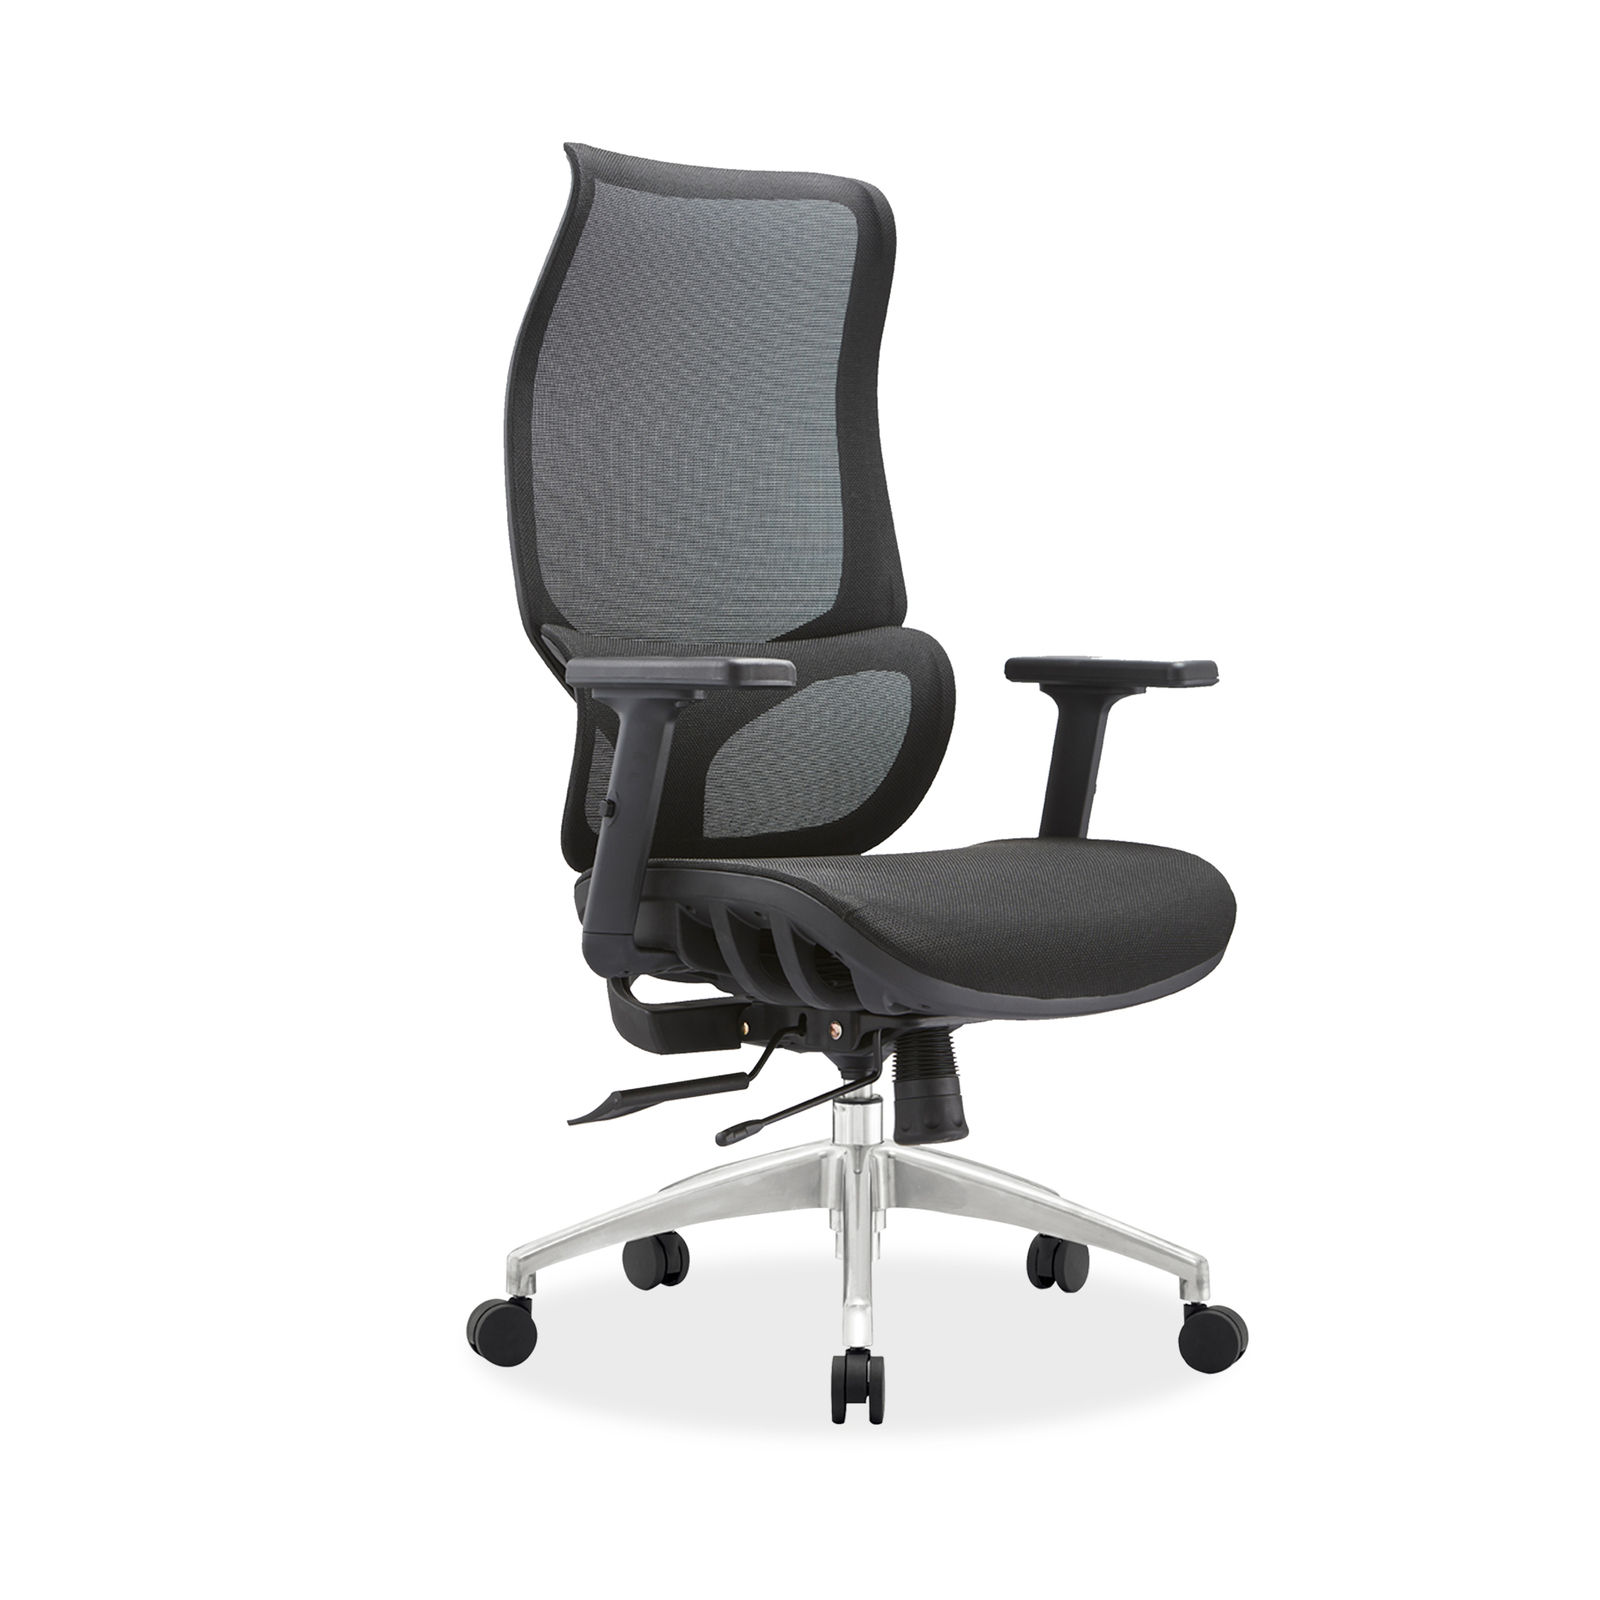 Ergonomic Office Chair Computer Gaming Mesh Executive Chairs Work Desk Seat Black